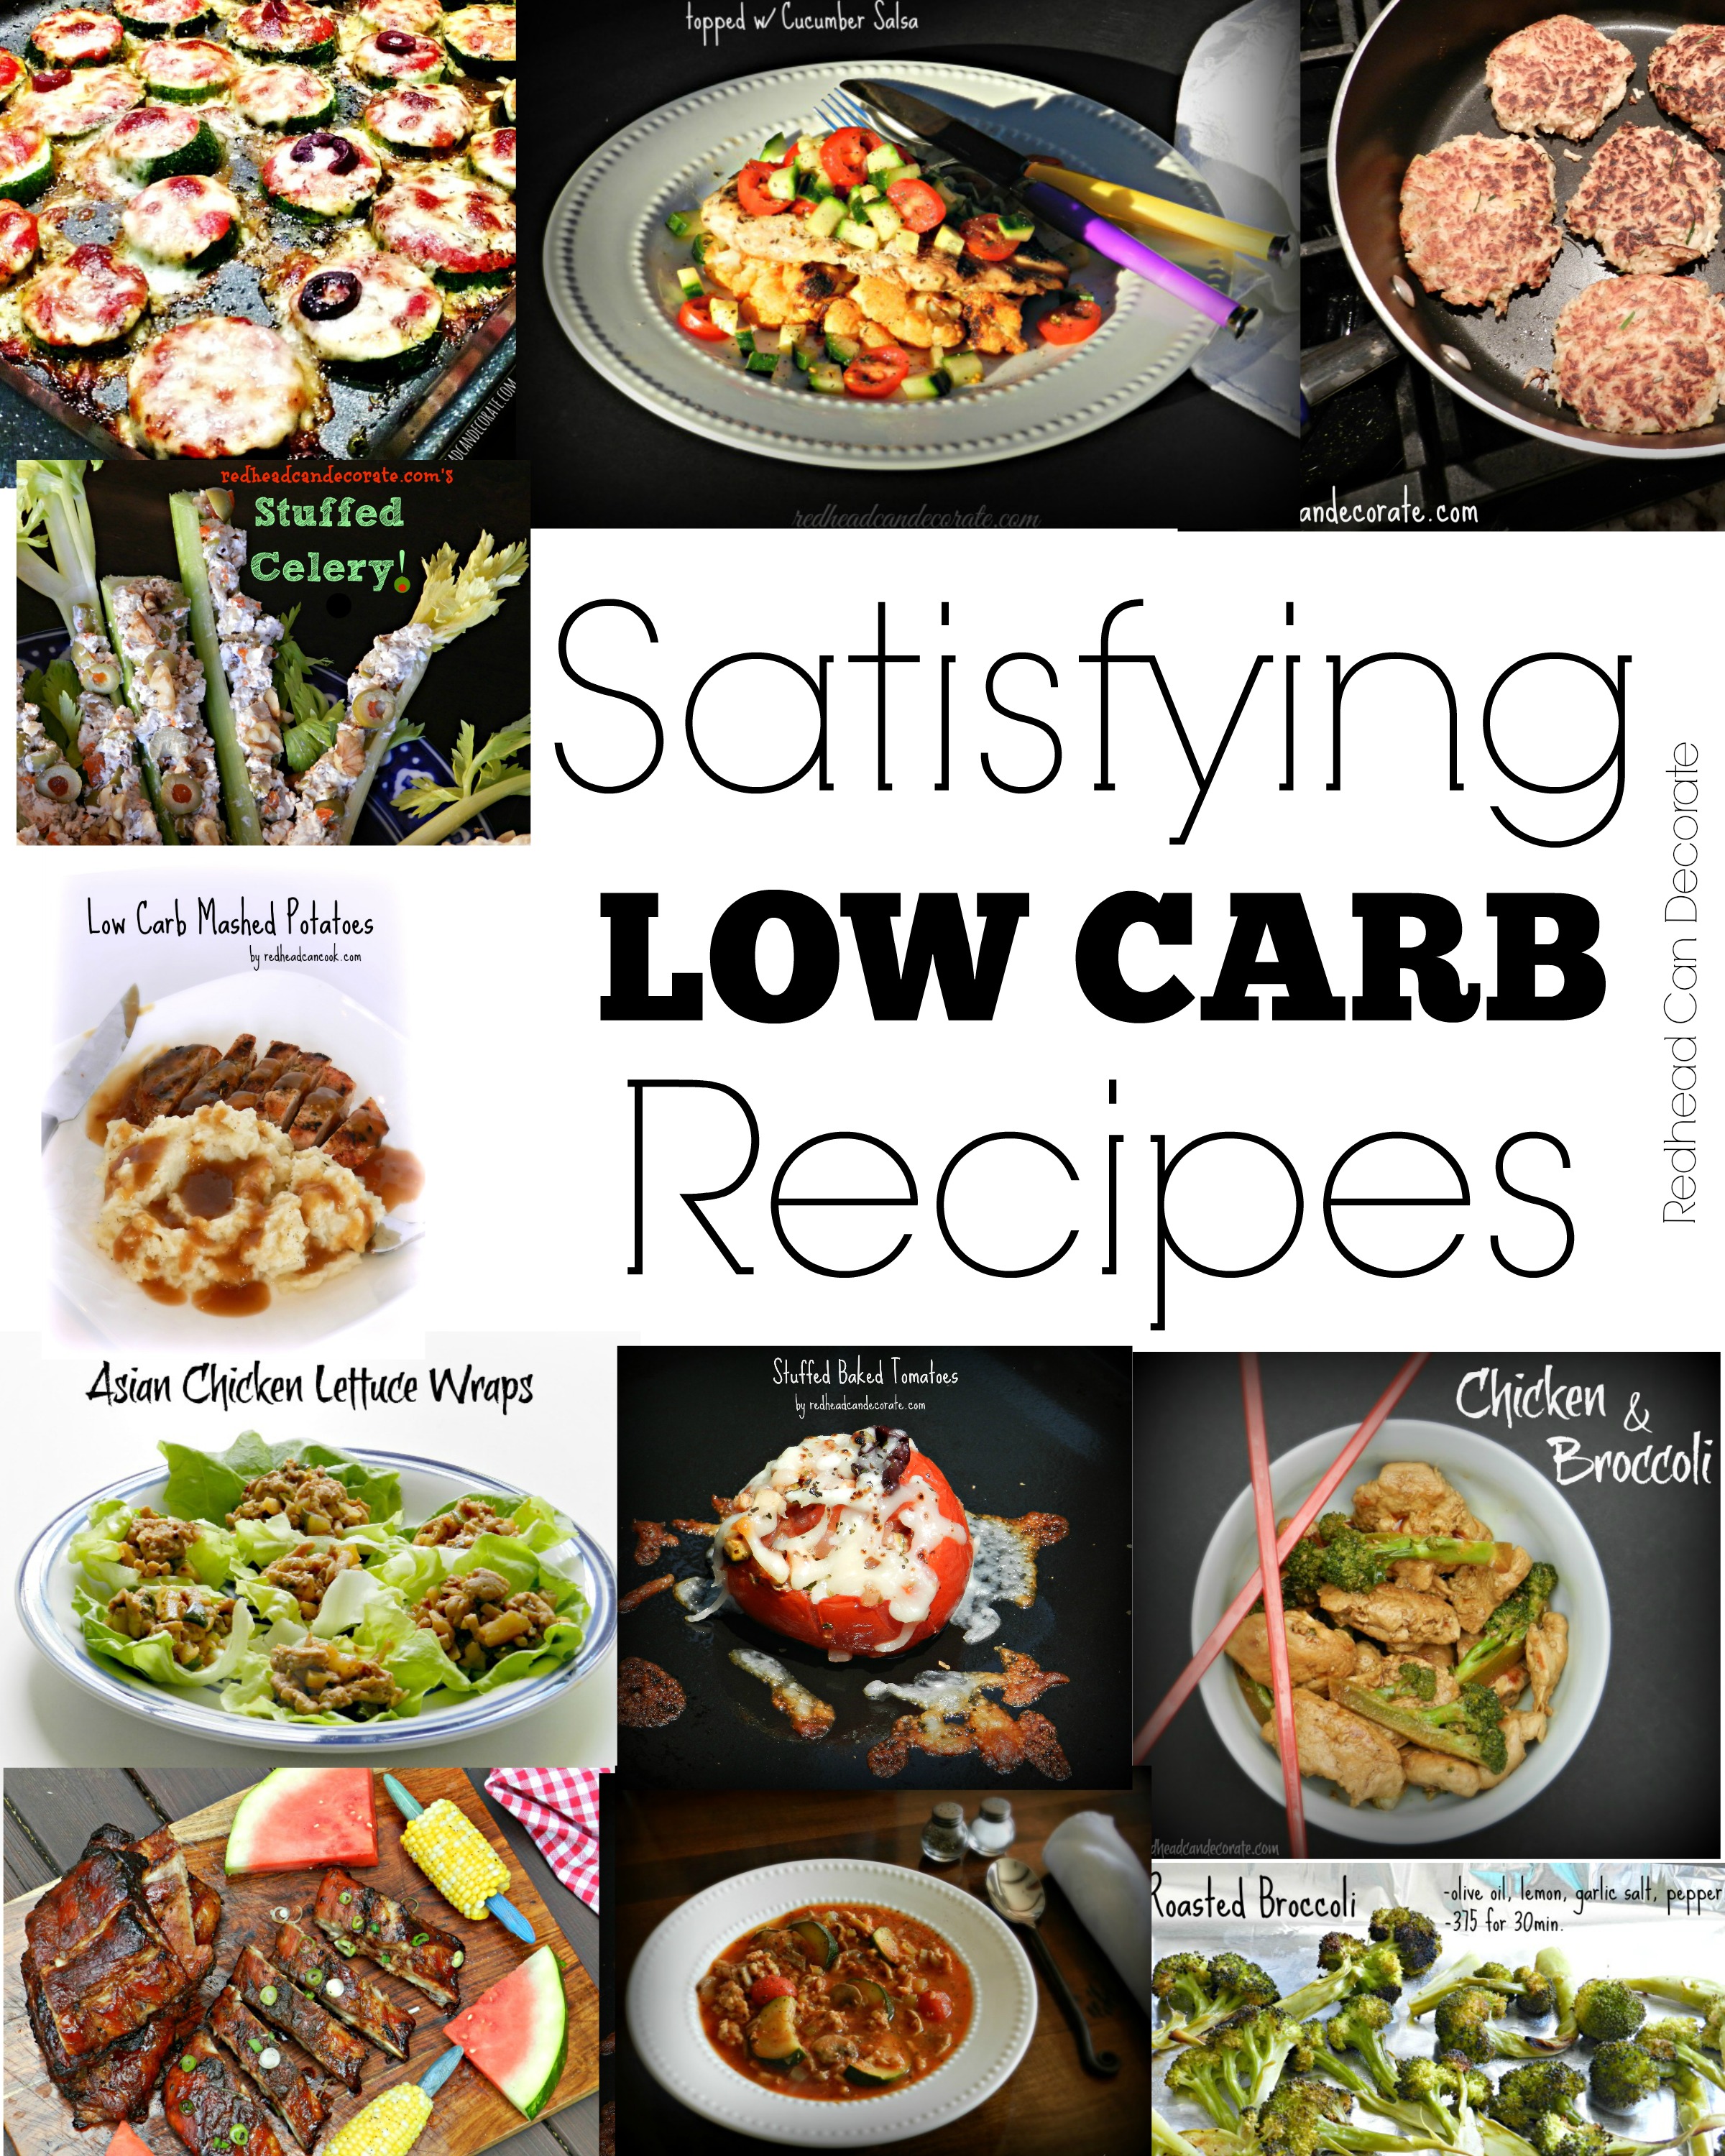 I have tested every one of these low carb recipes and all of them are very satisfying and filling.  I lost weight quickly and always go back to these when I need to loose a few more